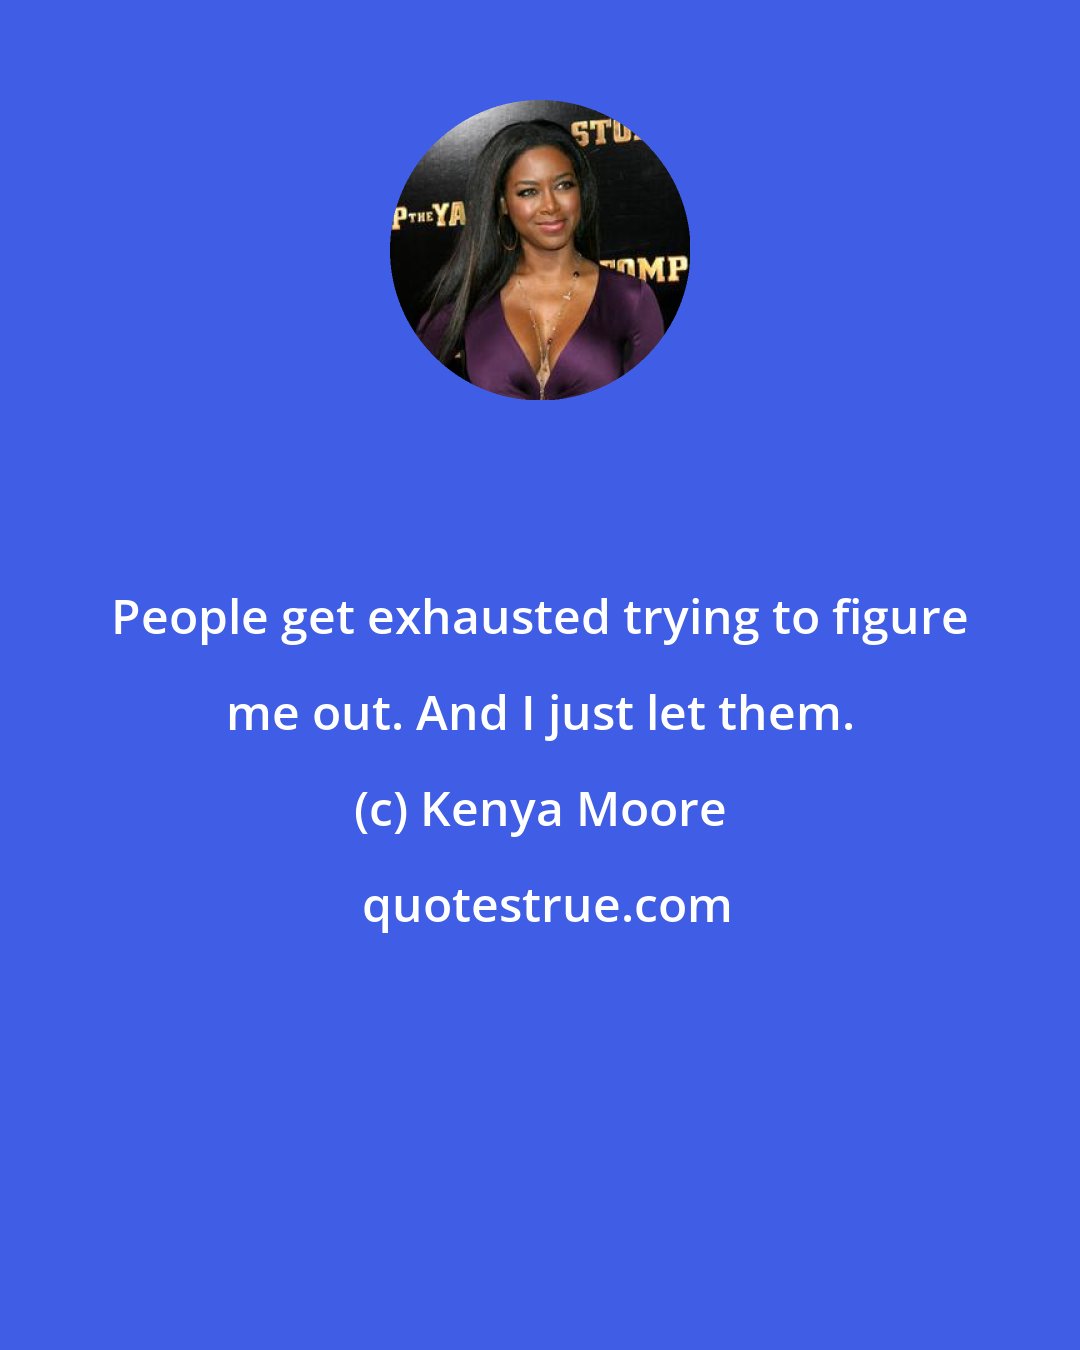 Kenya Moore: People get exhausted trying to figure me out. And I just let them.